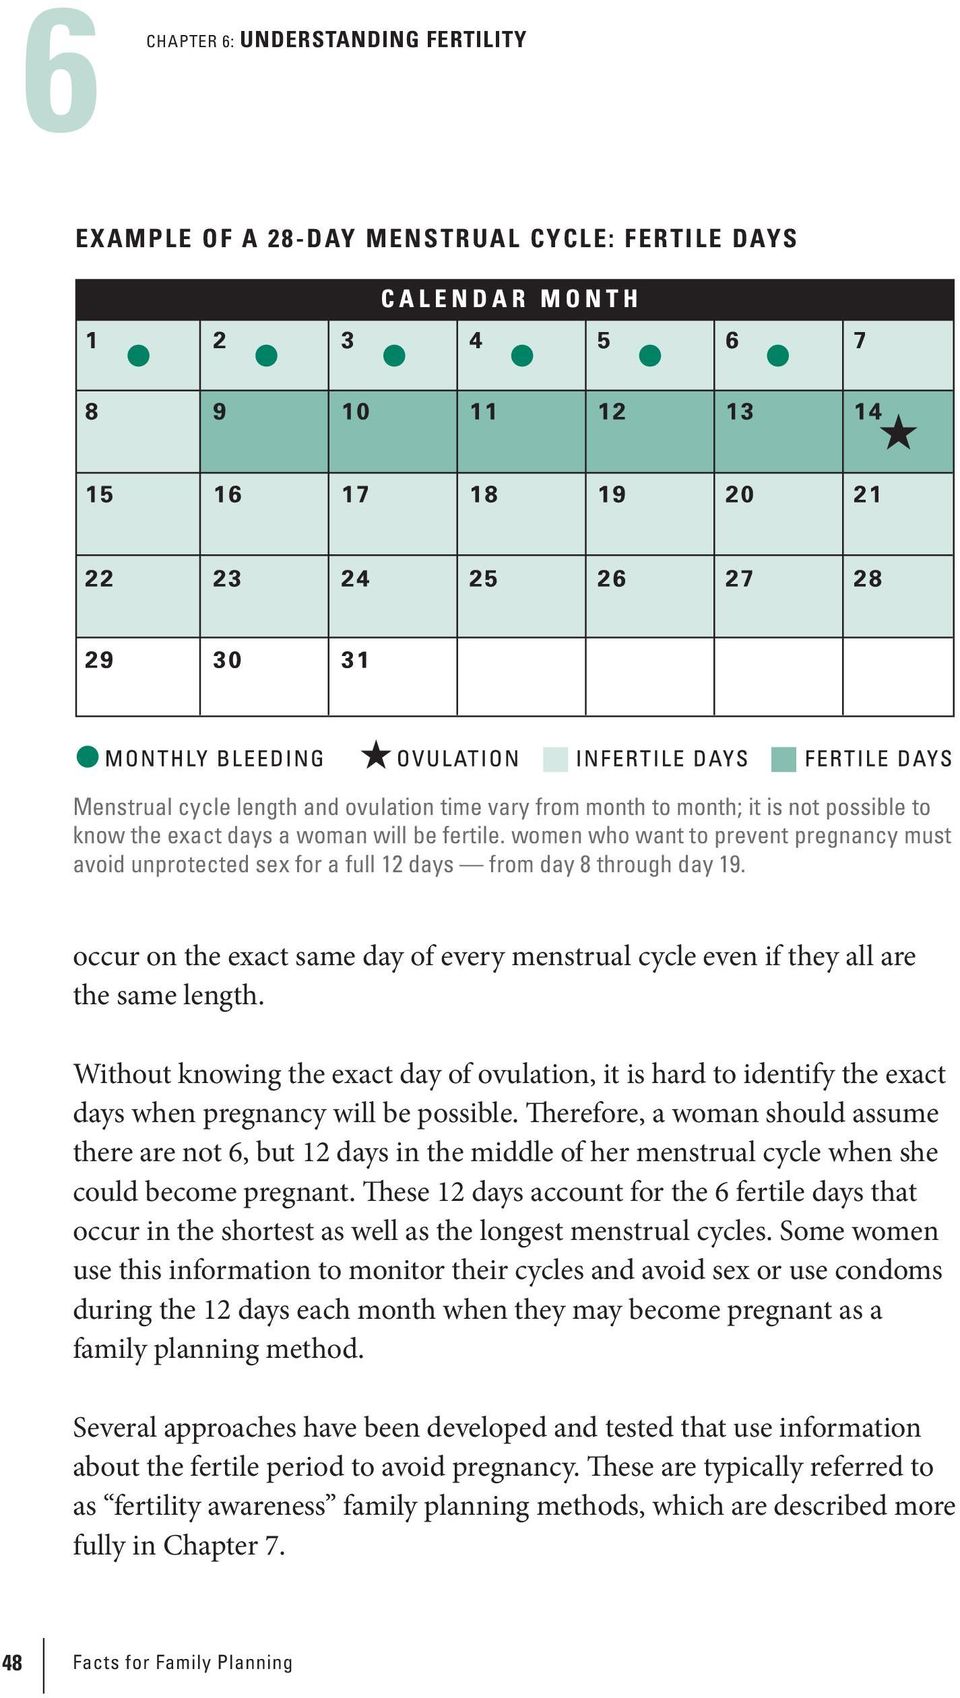 occur on the exact same day of every menstrual cycle even if they all are the same length.